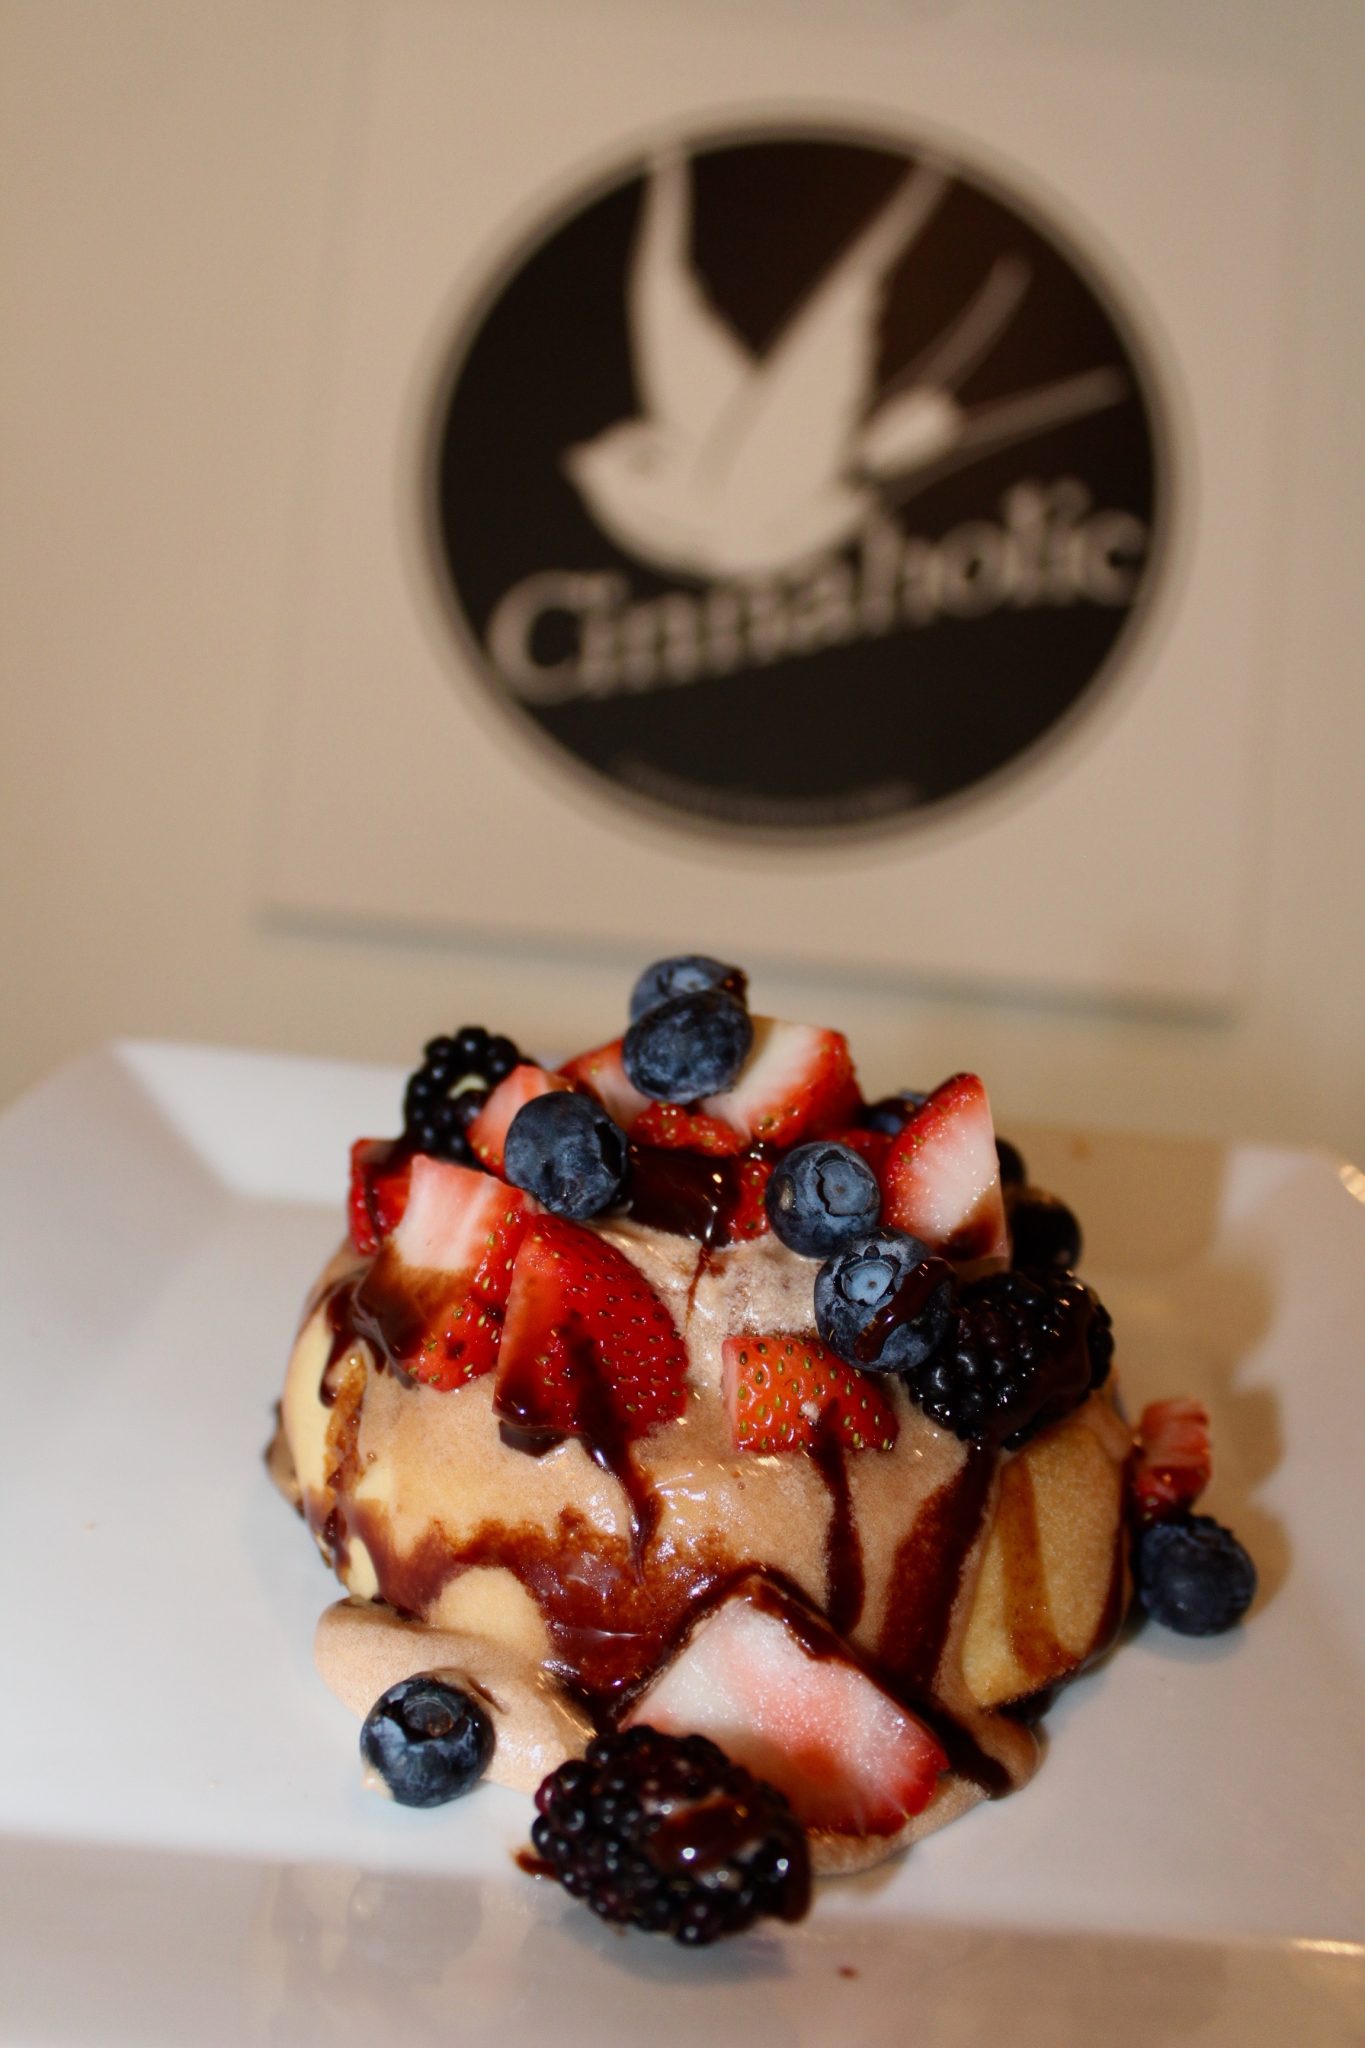 An Afternoon Out At Cinnaholic